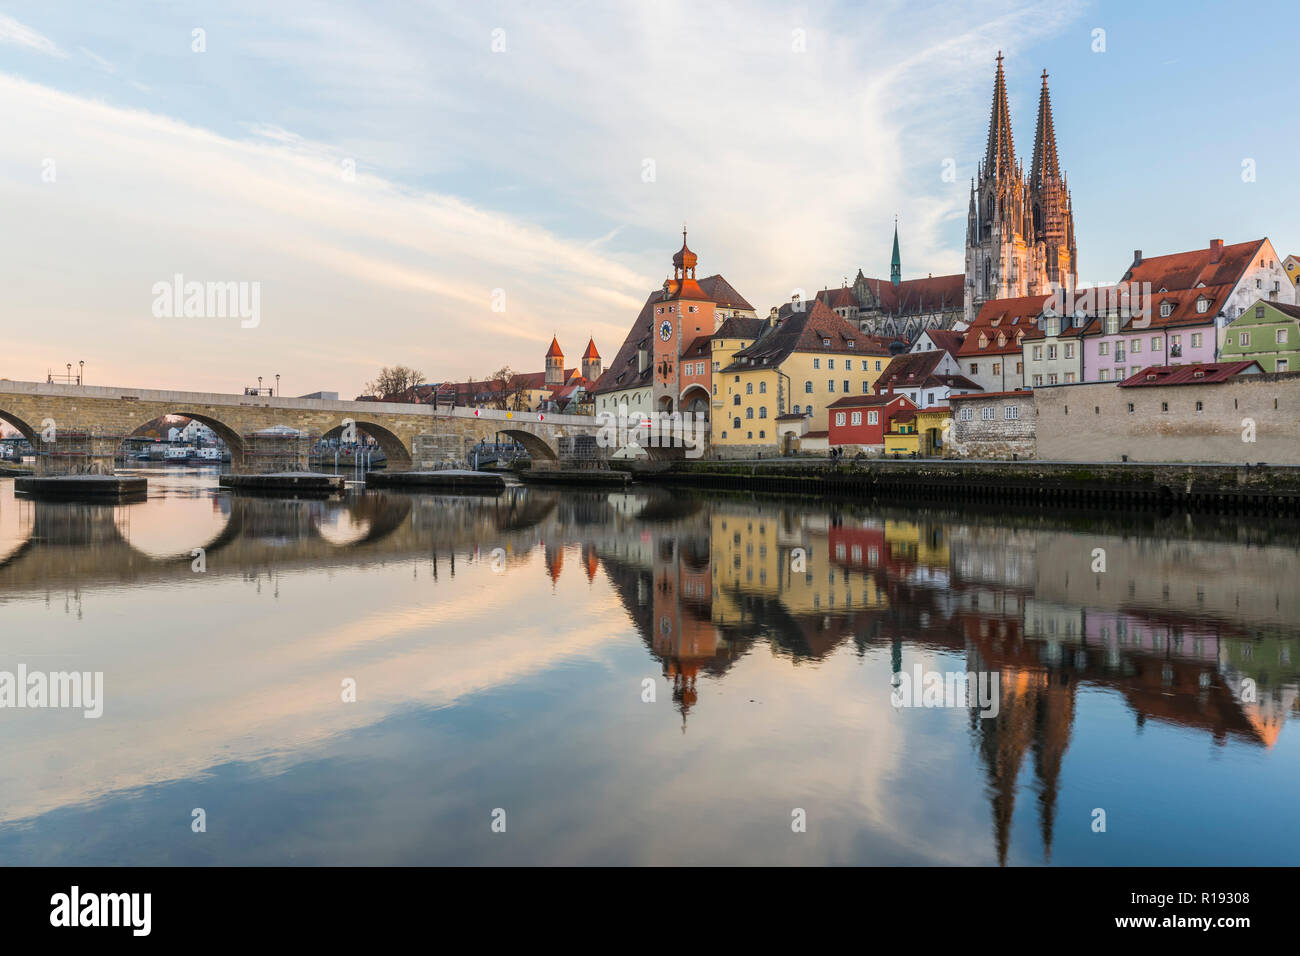 View of the Stone Bridge, St. Peter's Church and the Old Town of Regensburg Stock Photo